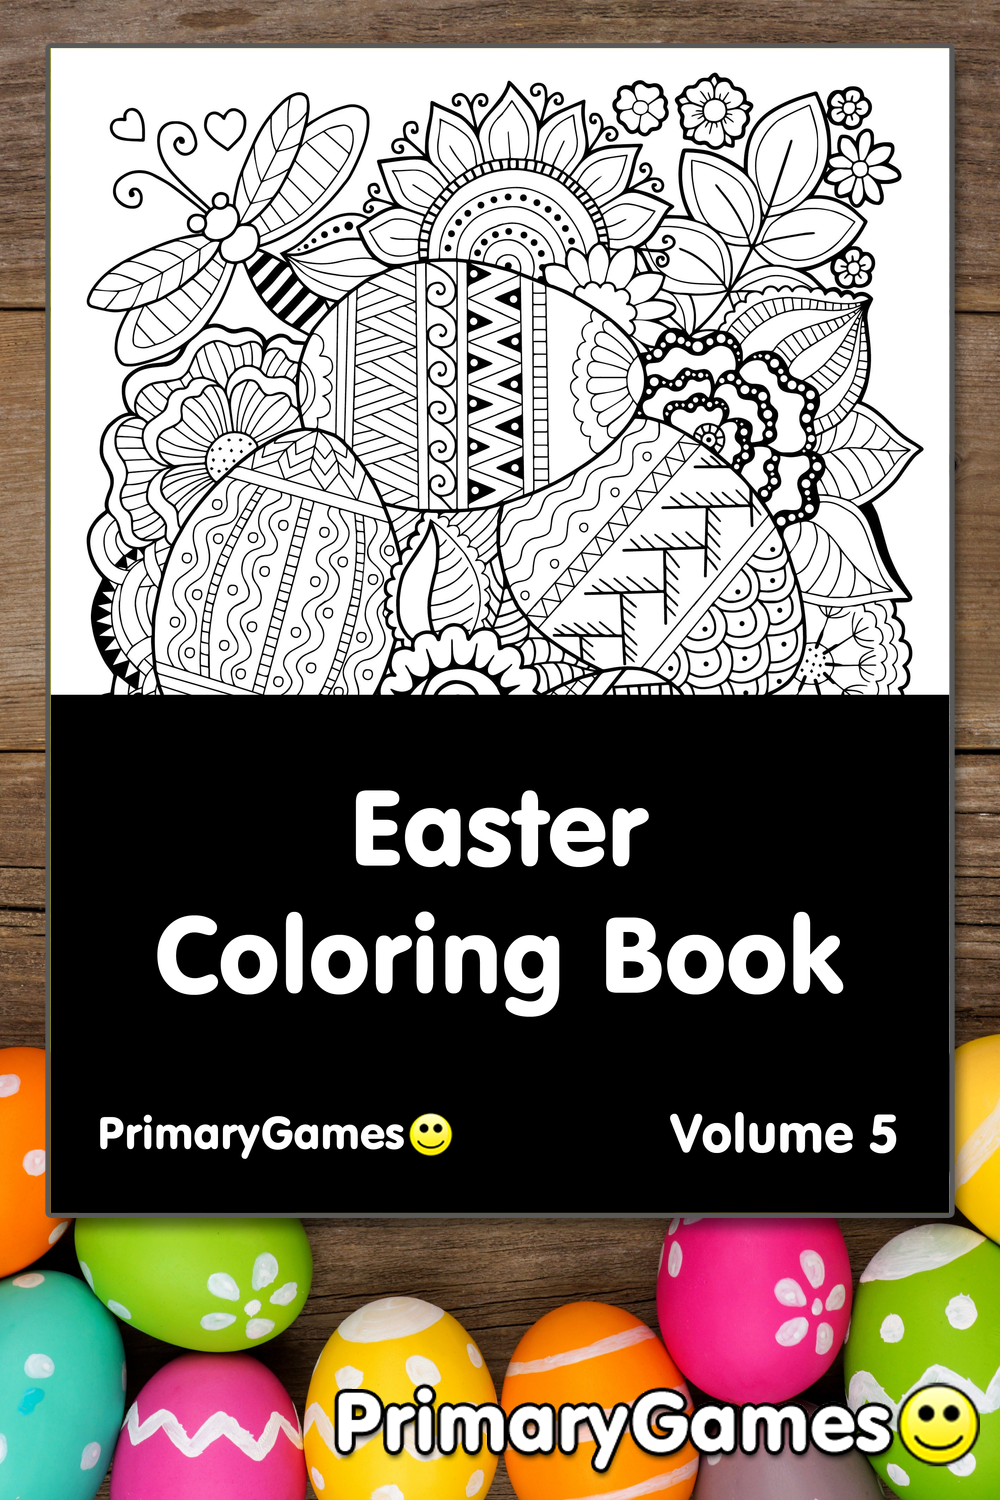 Easter Coloring eBook Volume 5 • FREE Printable PDF from PrimaryGames